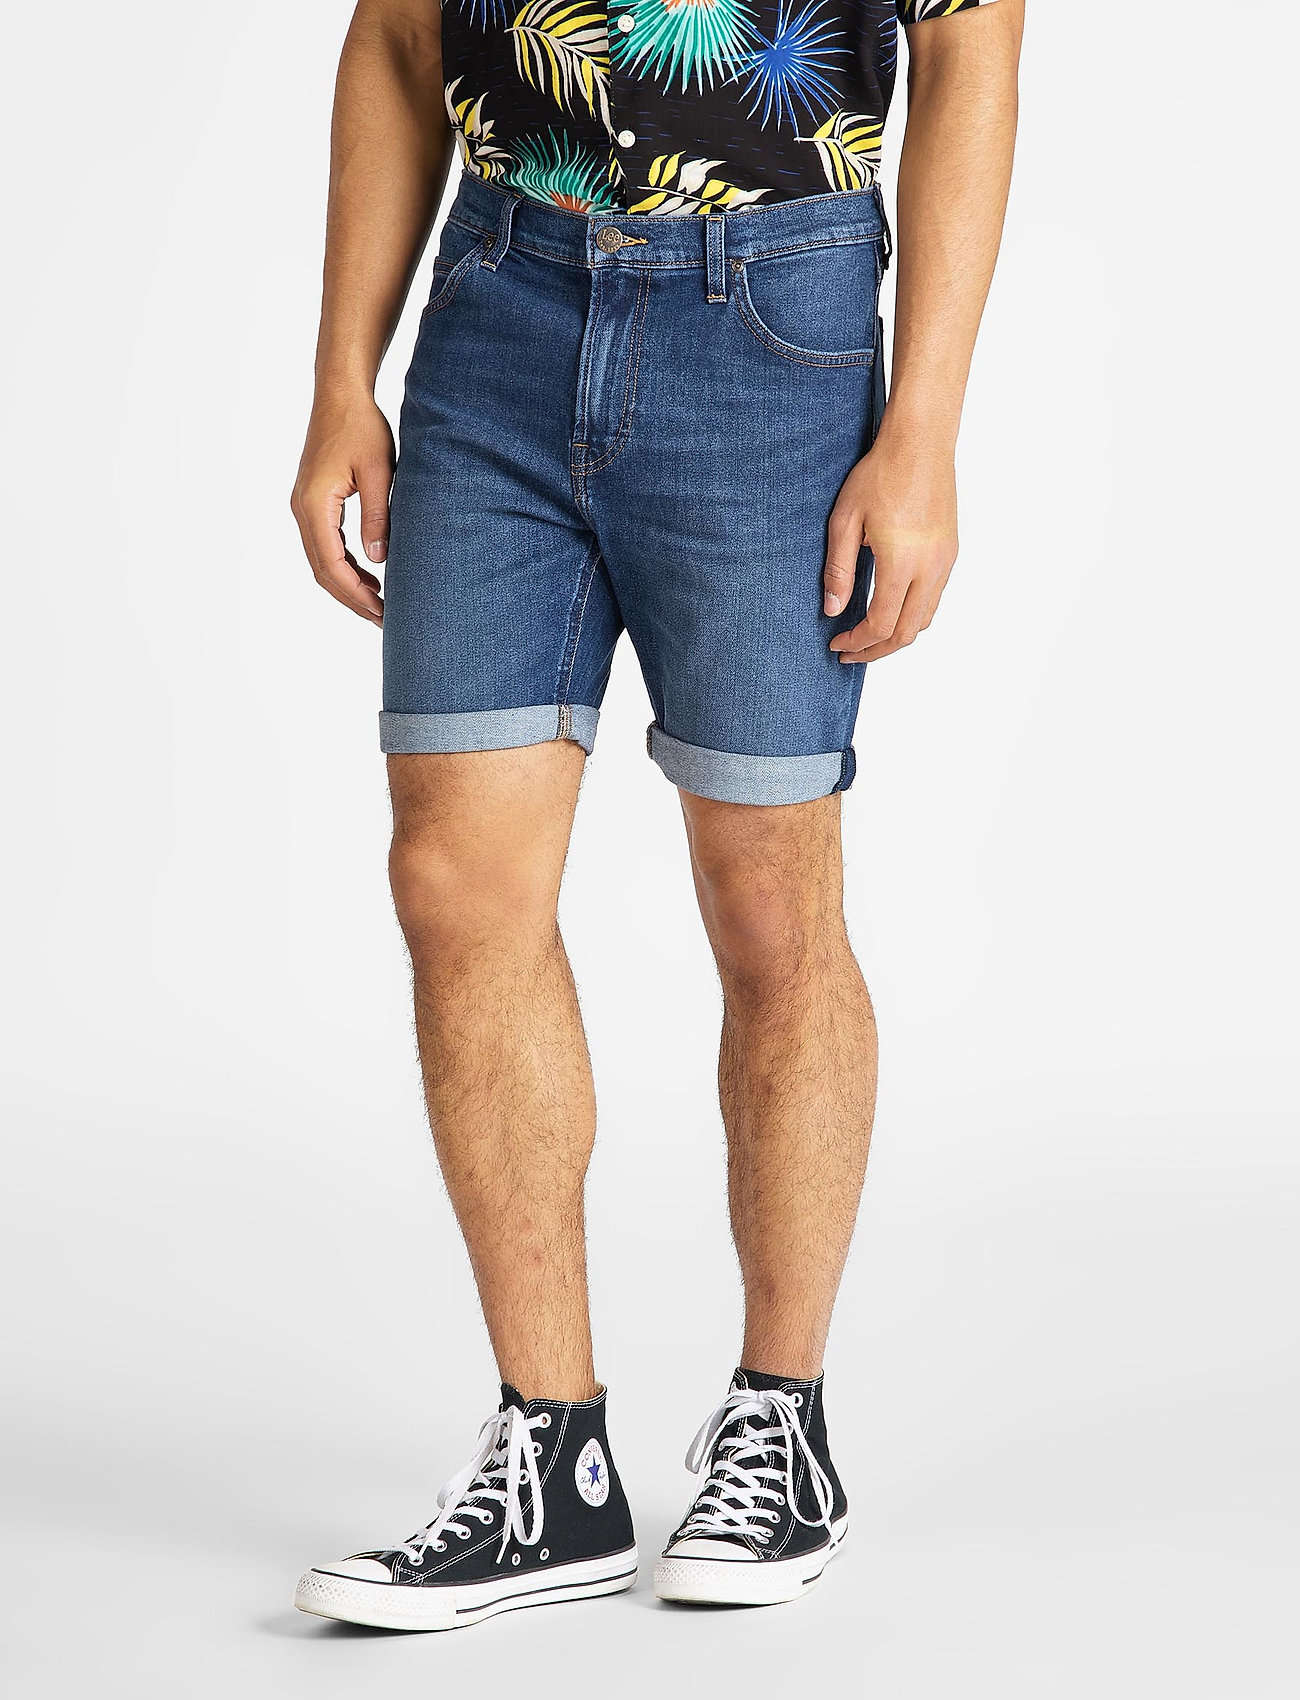 lee jeans shorts